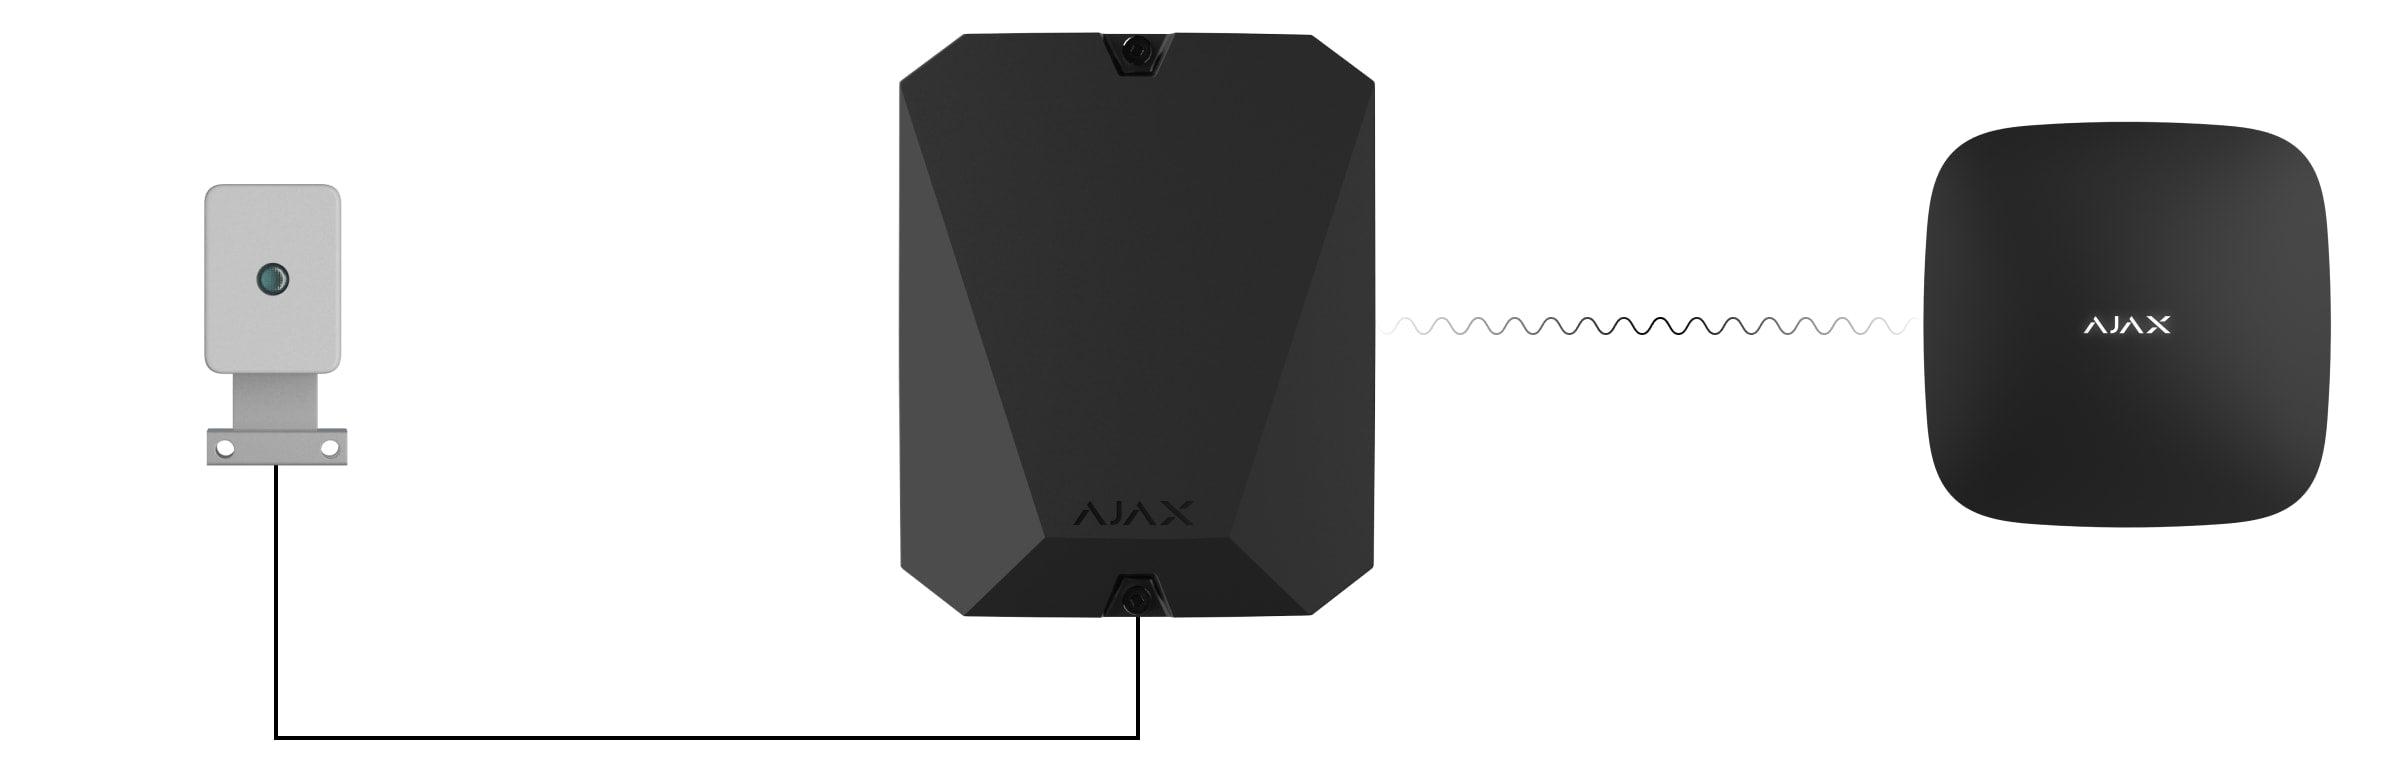 Ajax Multi Transmitter Module for connecting wired alarm to Ajax and managing security via the app Black